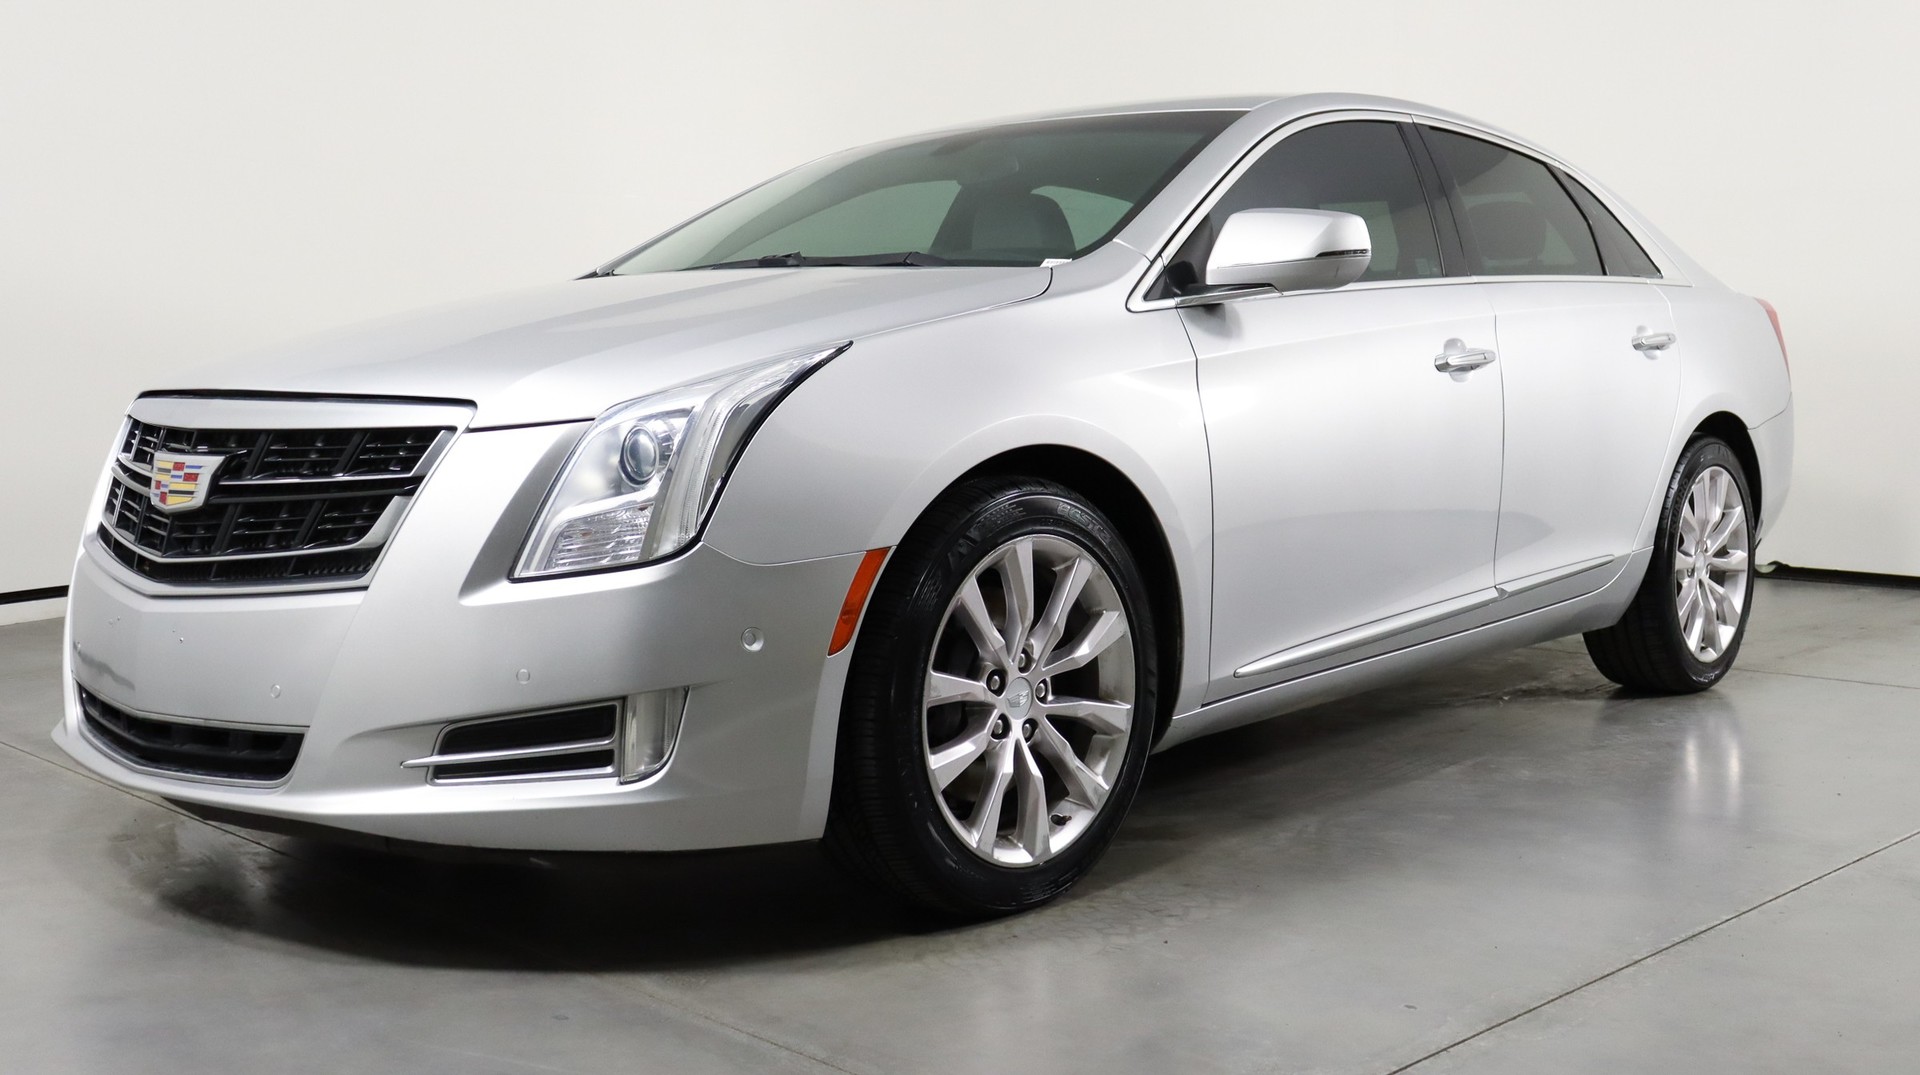 Used 2017 CADILLAC XTS LUXURY for sale in SAN ANTONIO | 124477 | Carvix